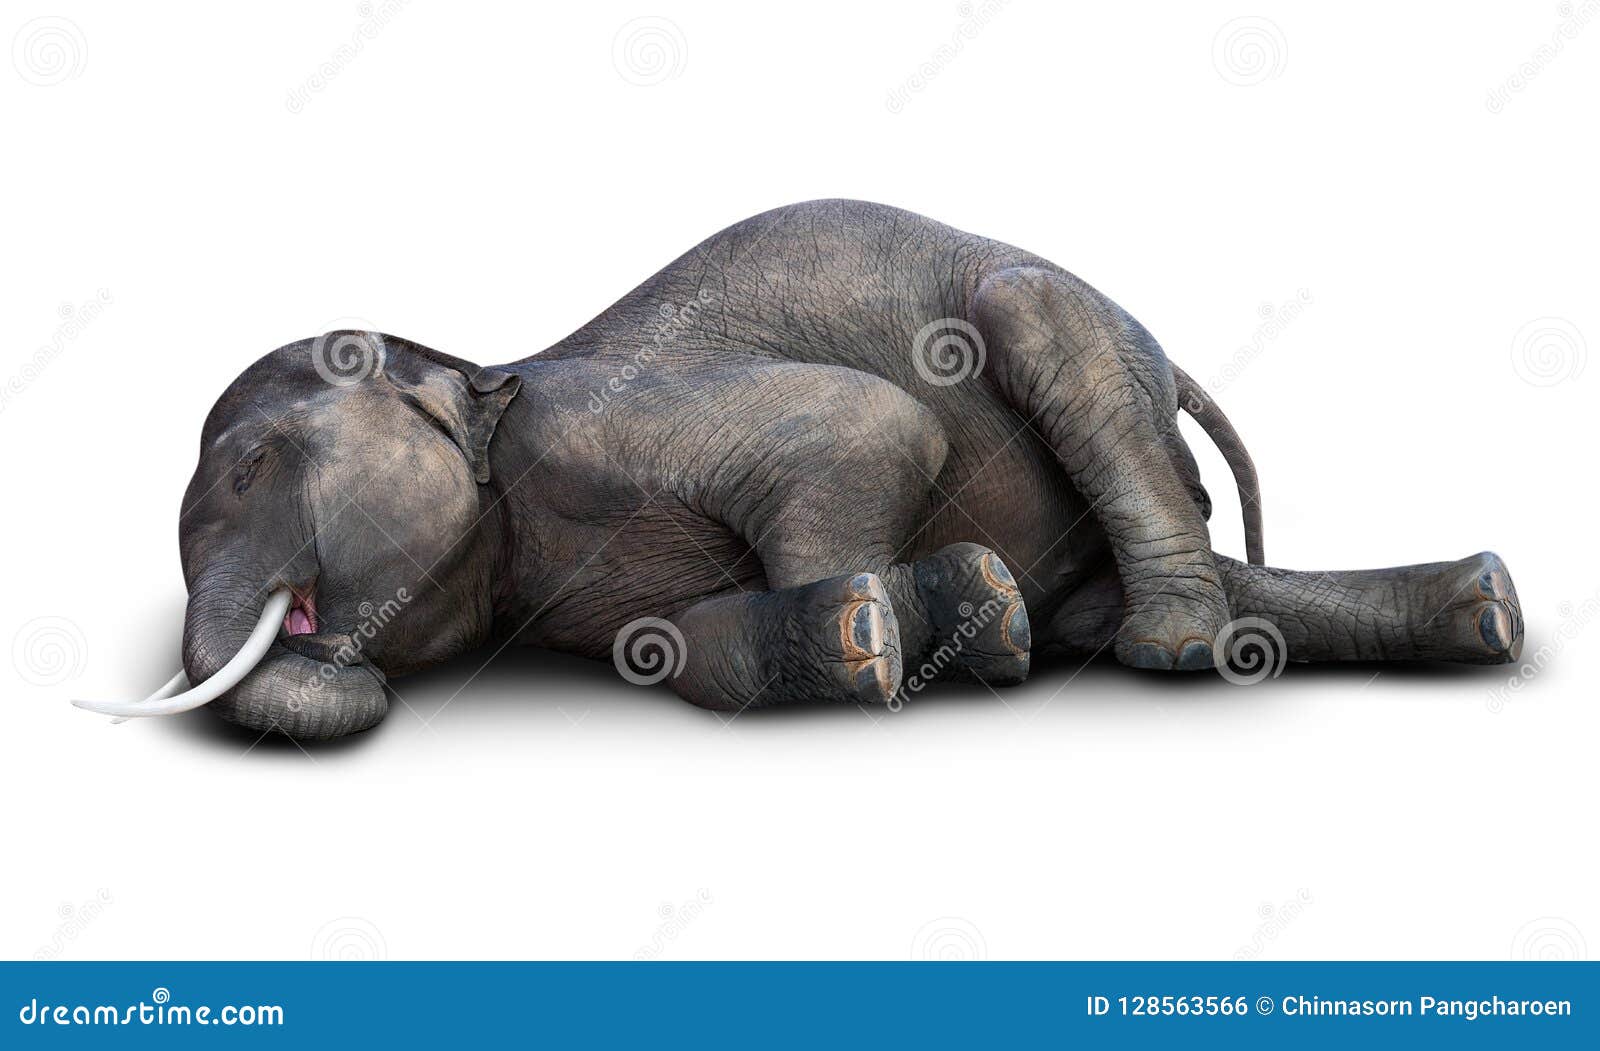 797 Dead Elephant Photos Free Royalty Free Stock Photos From Dreamstime